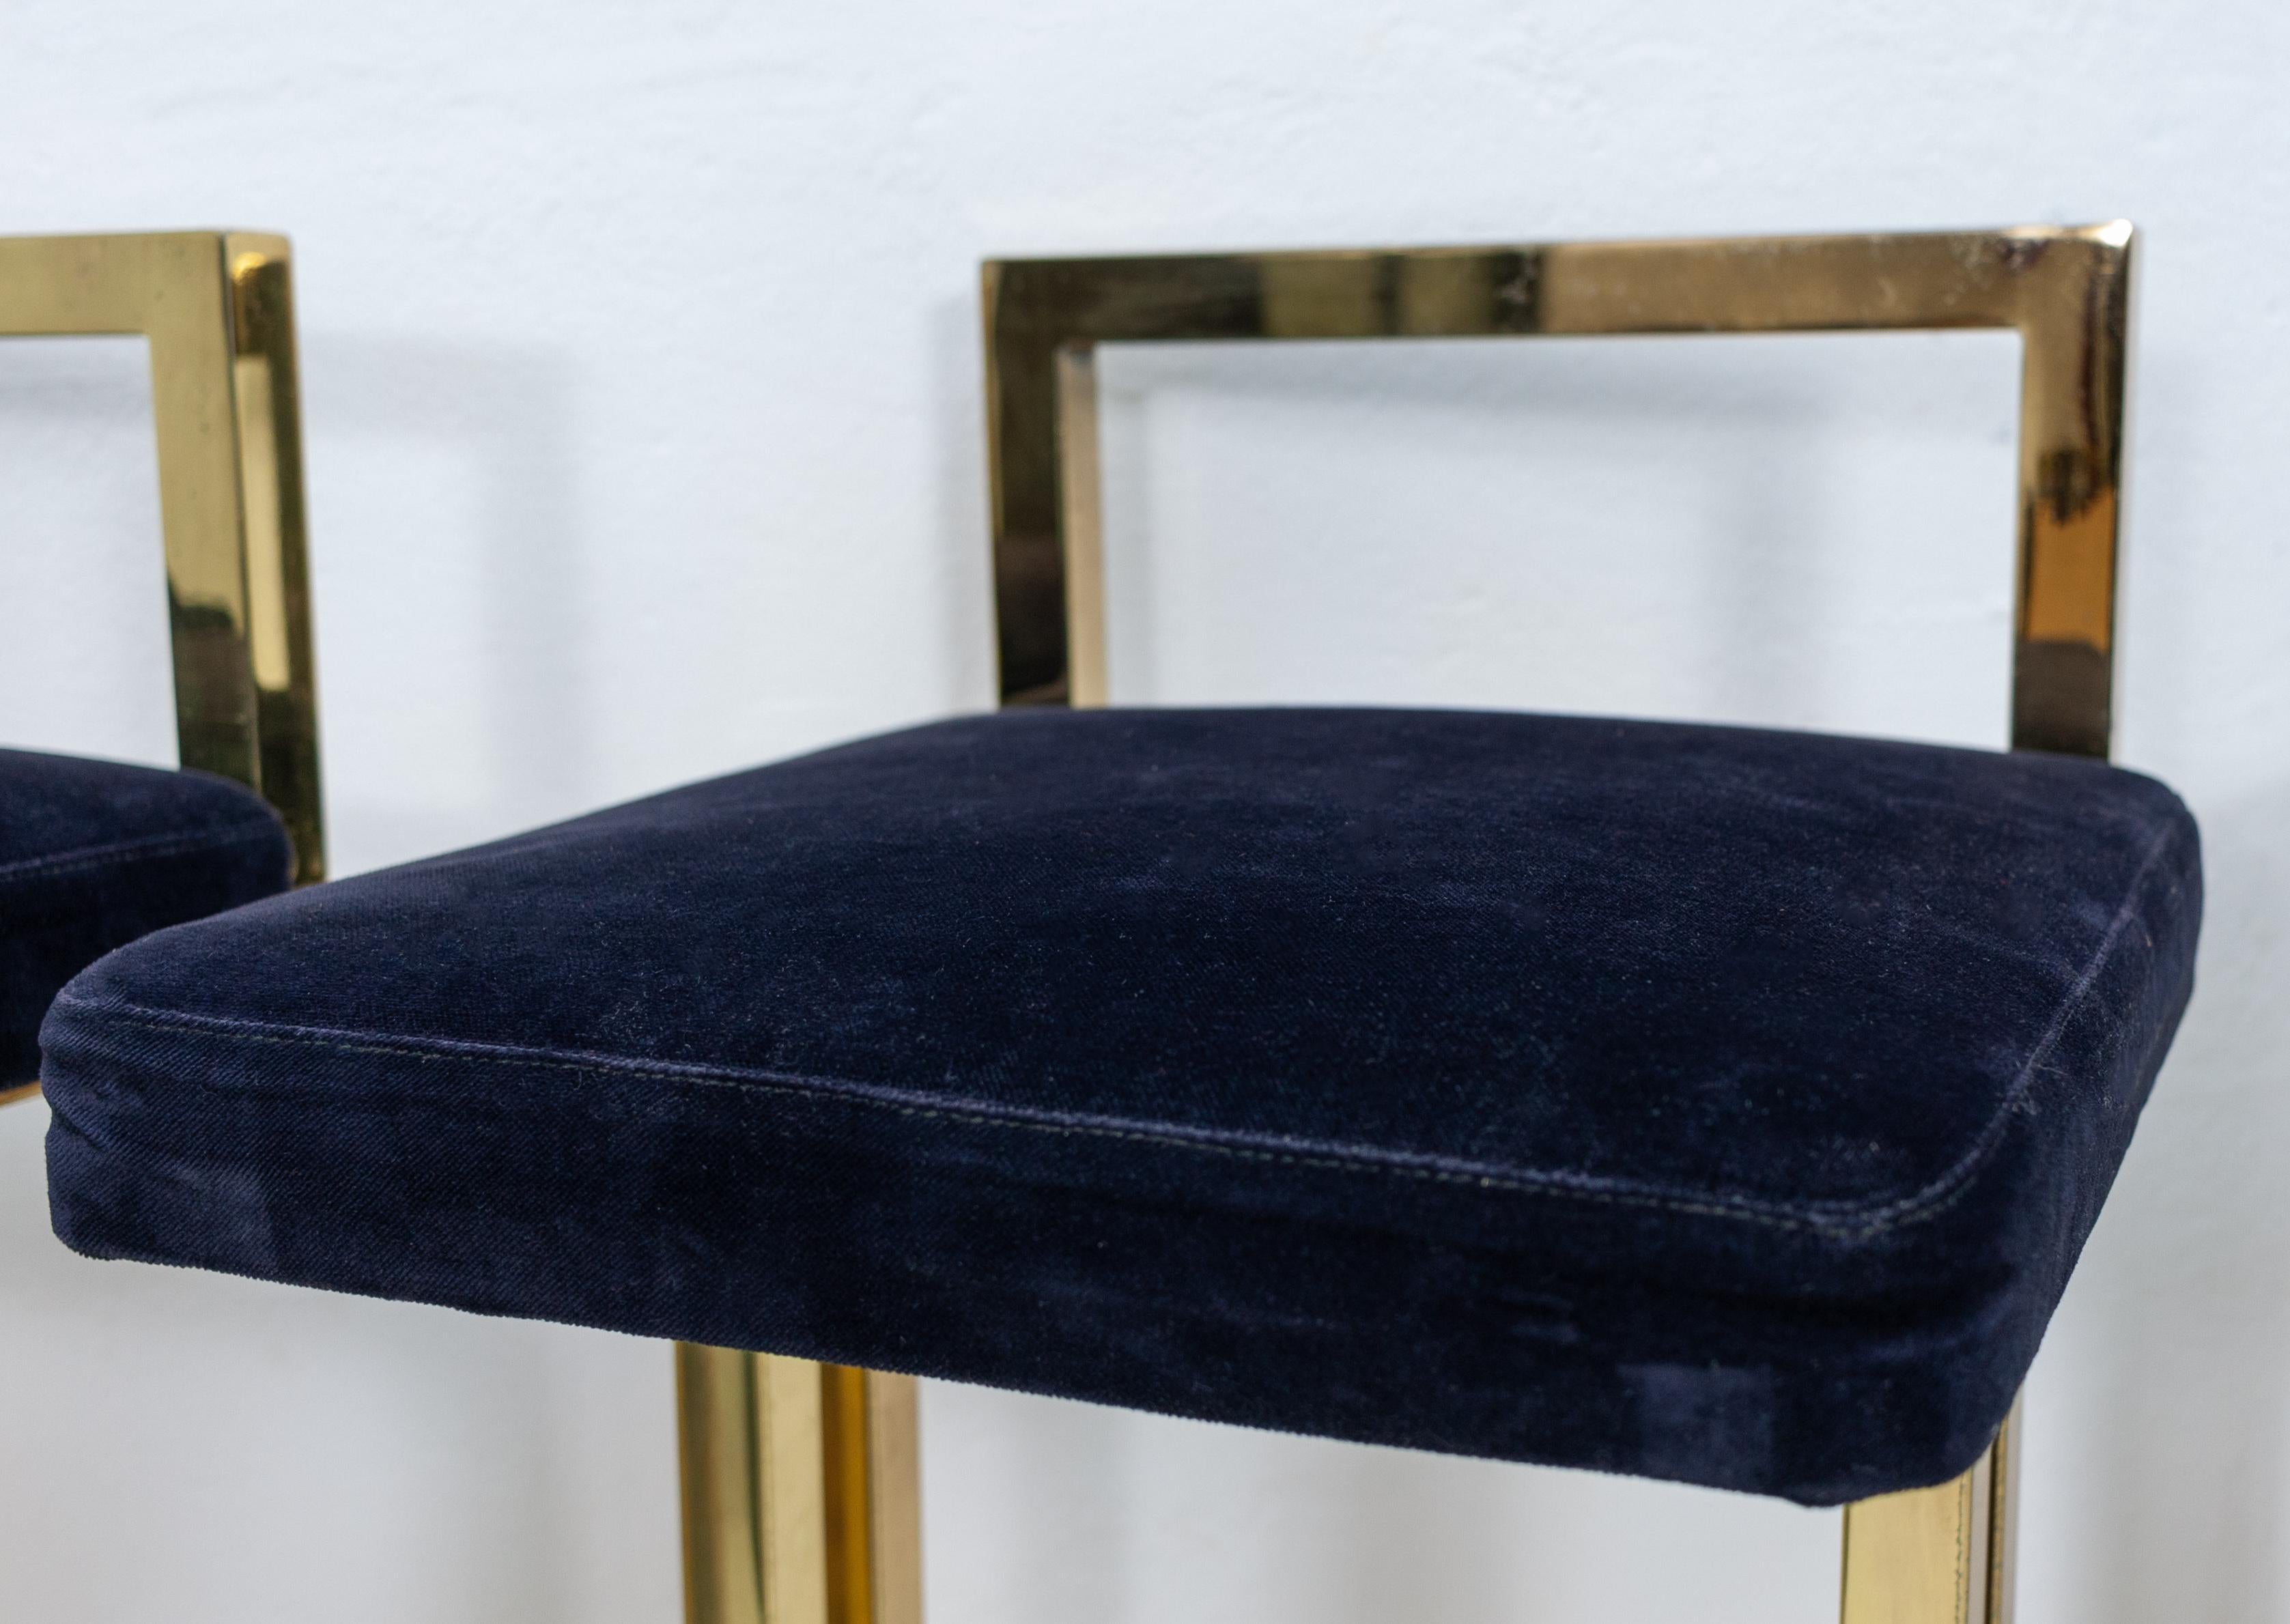 Four pieces off this iconic design. Maison Jansen, Paris, 1970s. Brass frame with a blue velvet upholstery. In a good vintage condition. Structural sound.



 